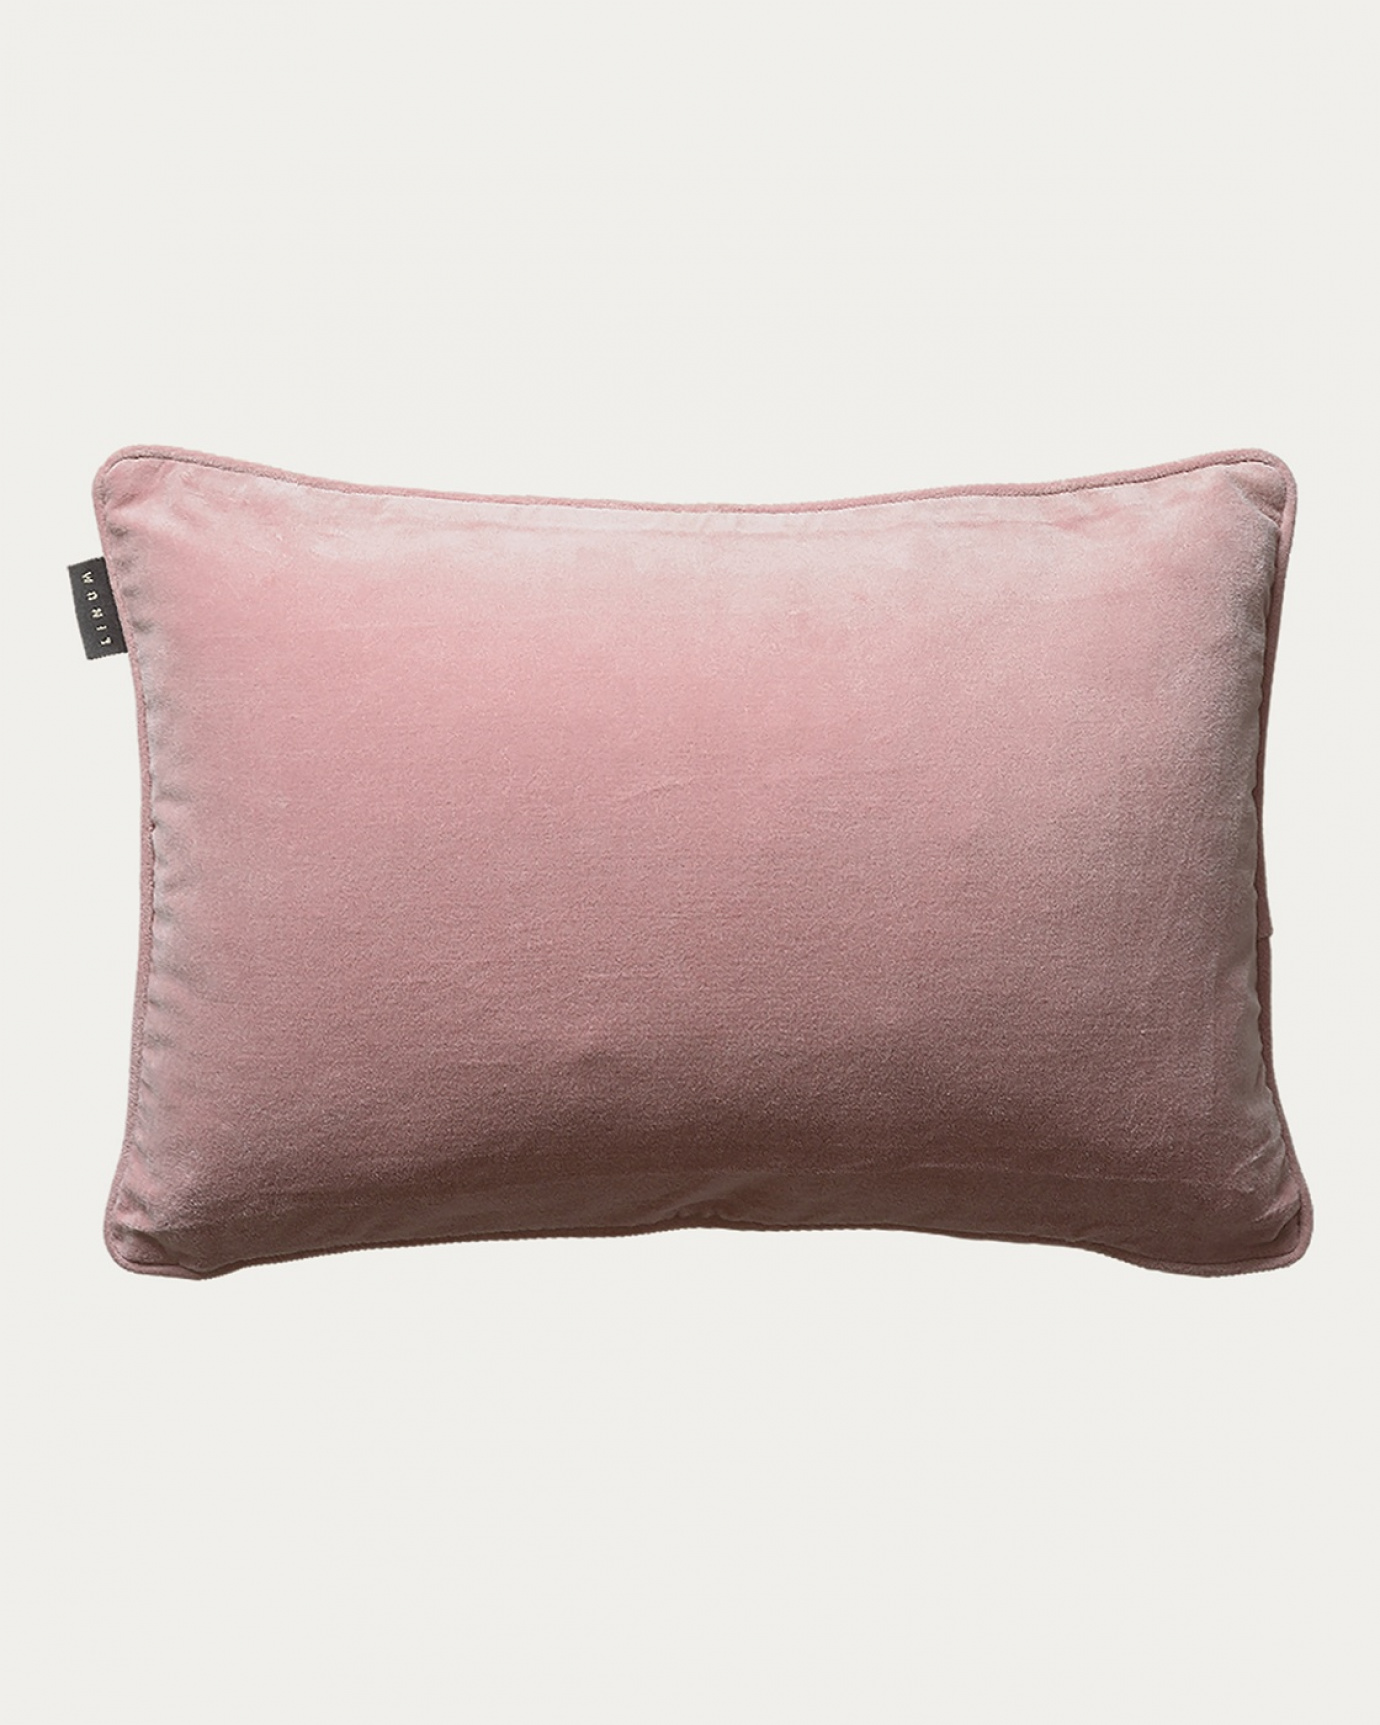 Product image dusty pink PAOLO cushion cover in soft cotton velvet from LINUM DESIGN. Size 40x60 cm.